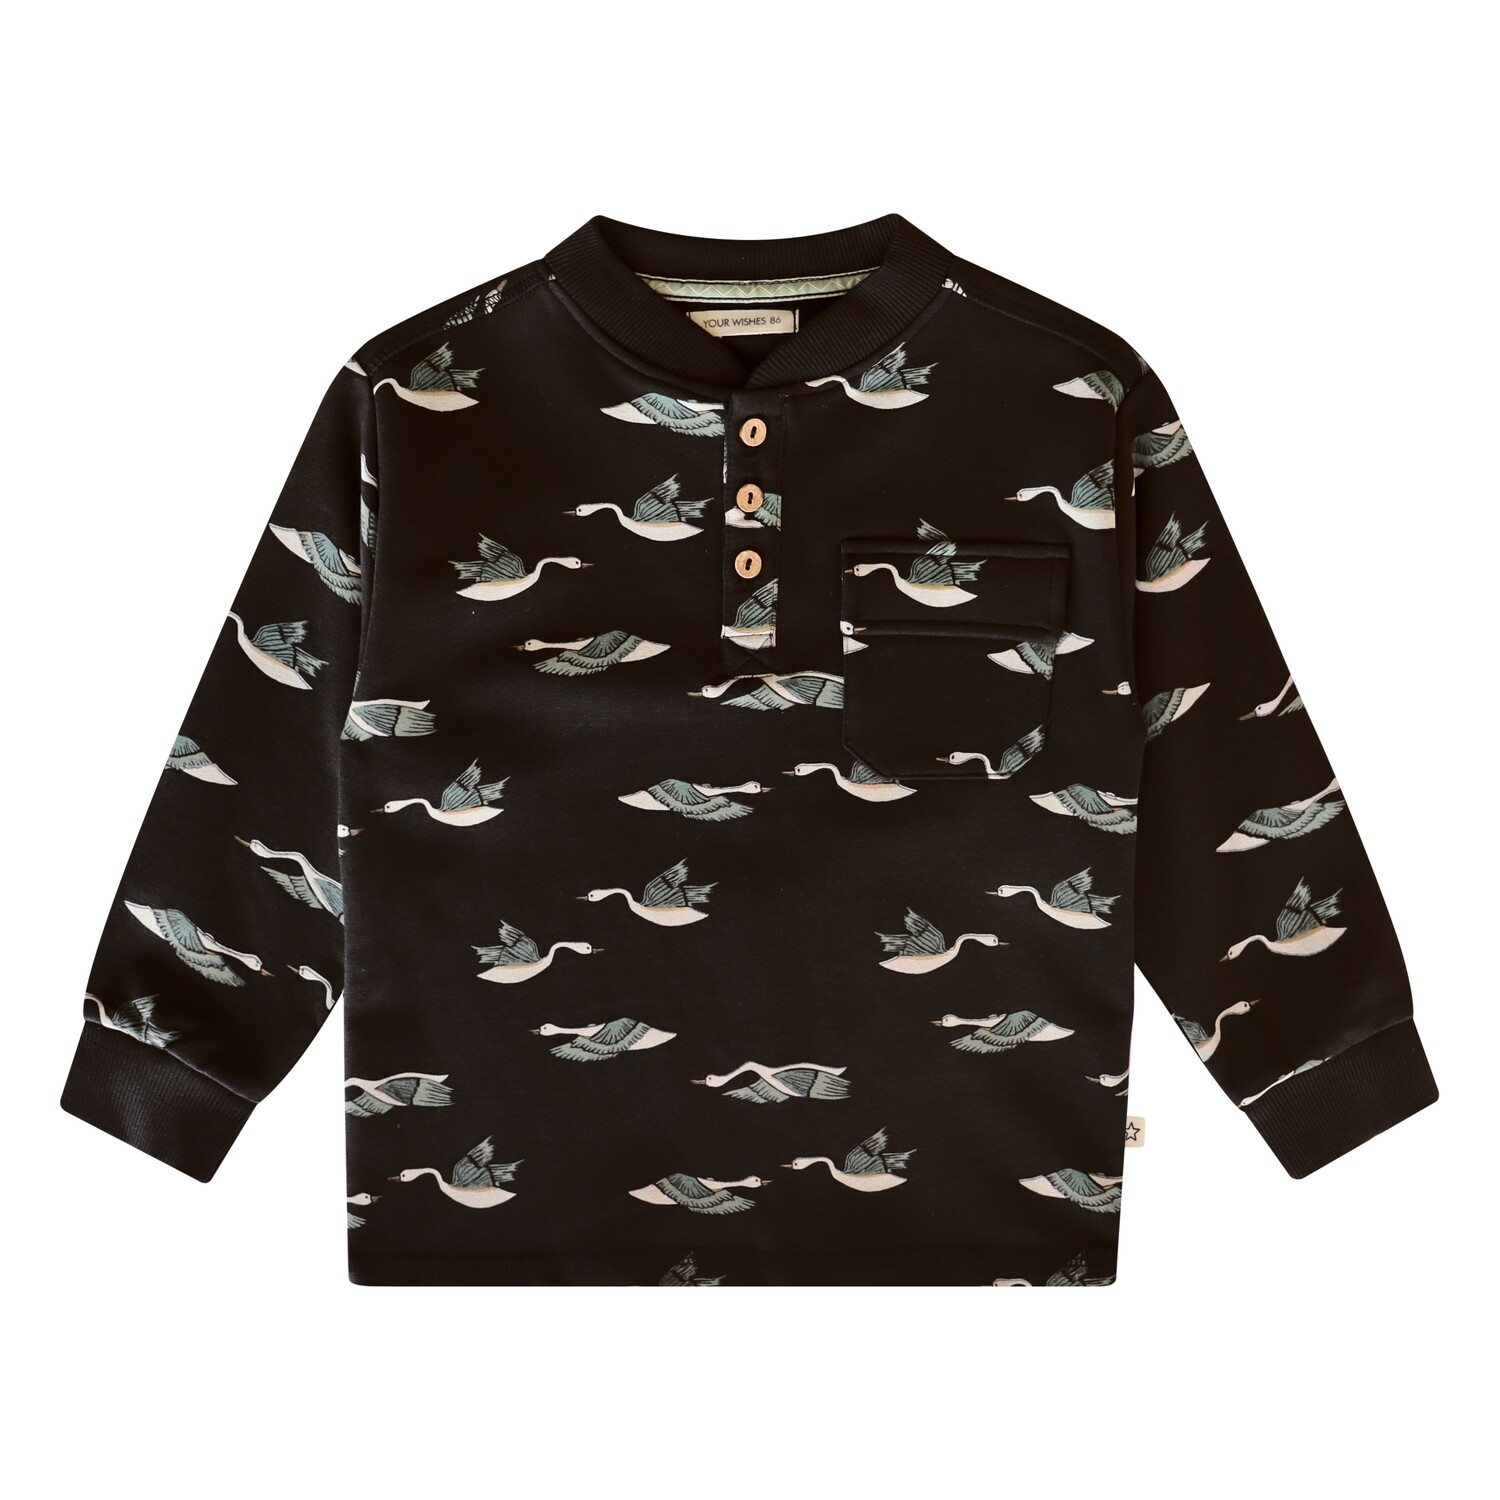 Your Wishes Longsleeve Ducks George